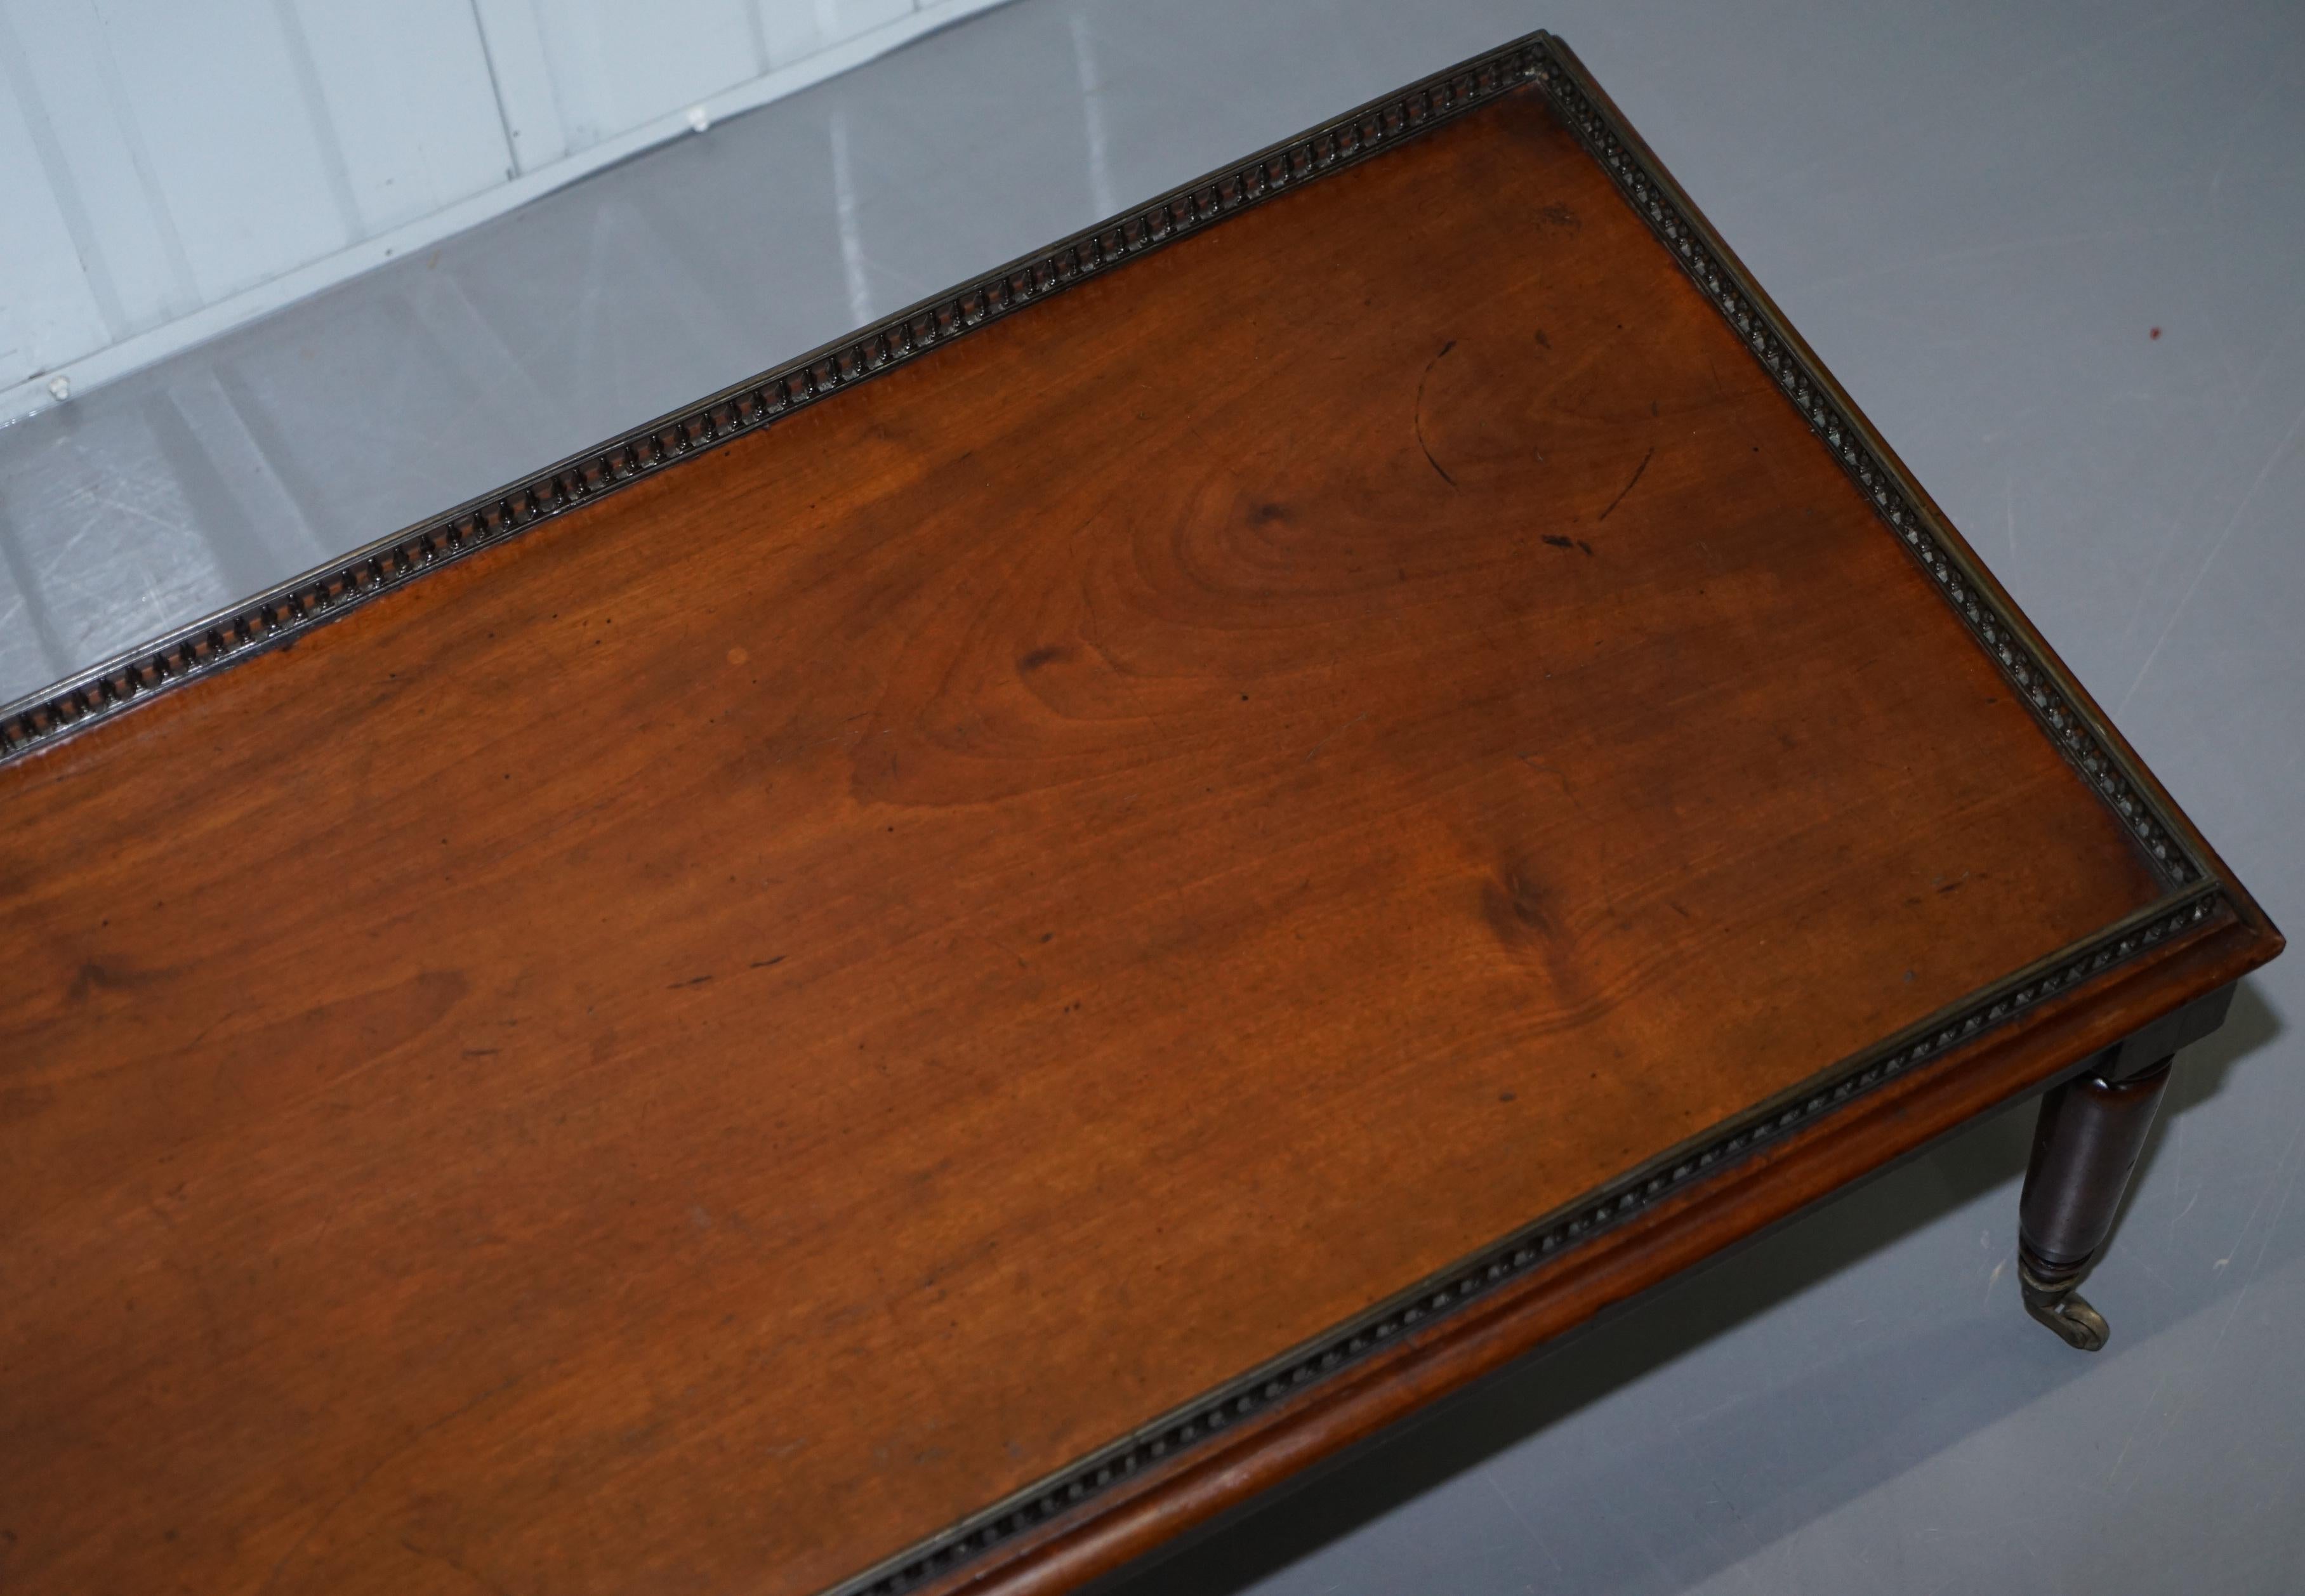 Hand-Crafted Very Rare Victorian Mahogany Coffee Table with Brass Gallery Rail after Gillows